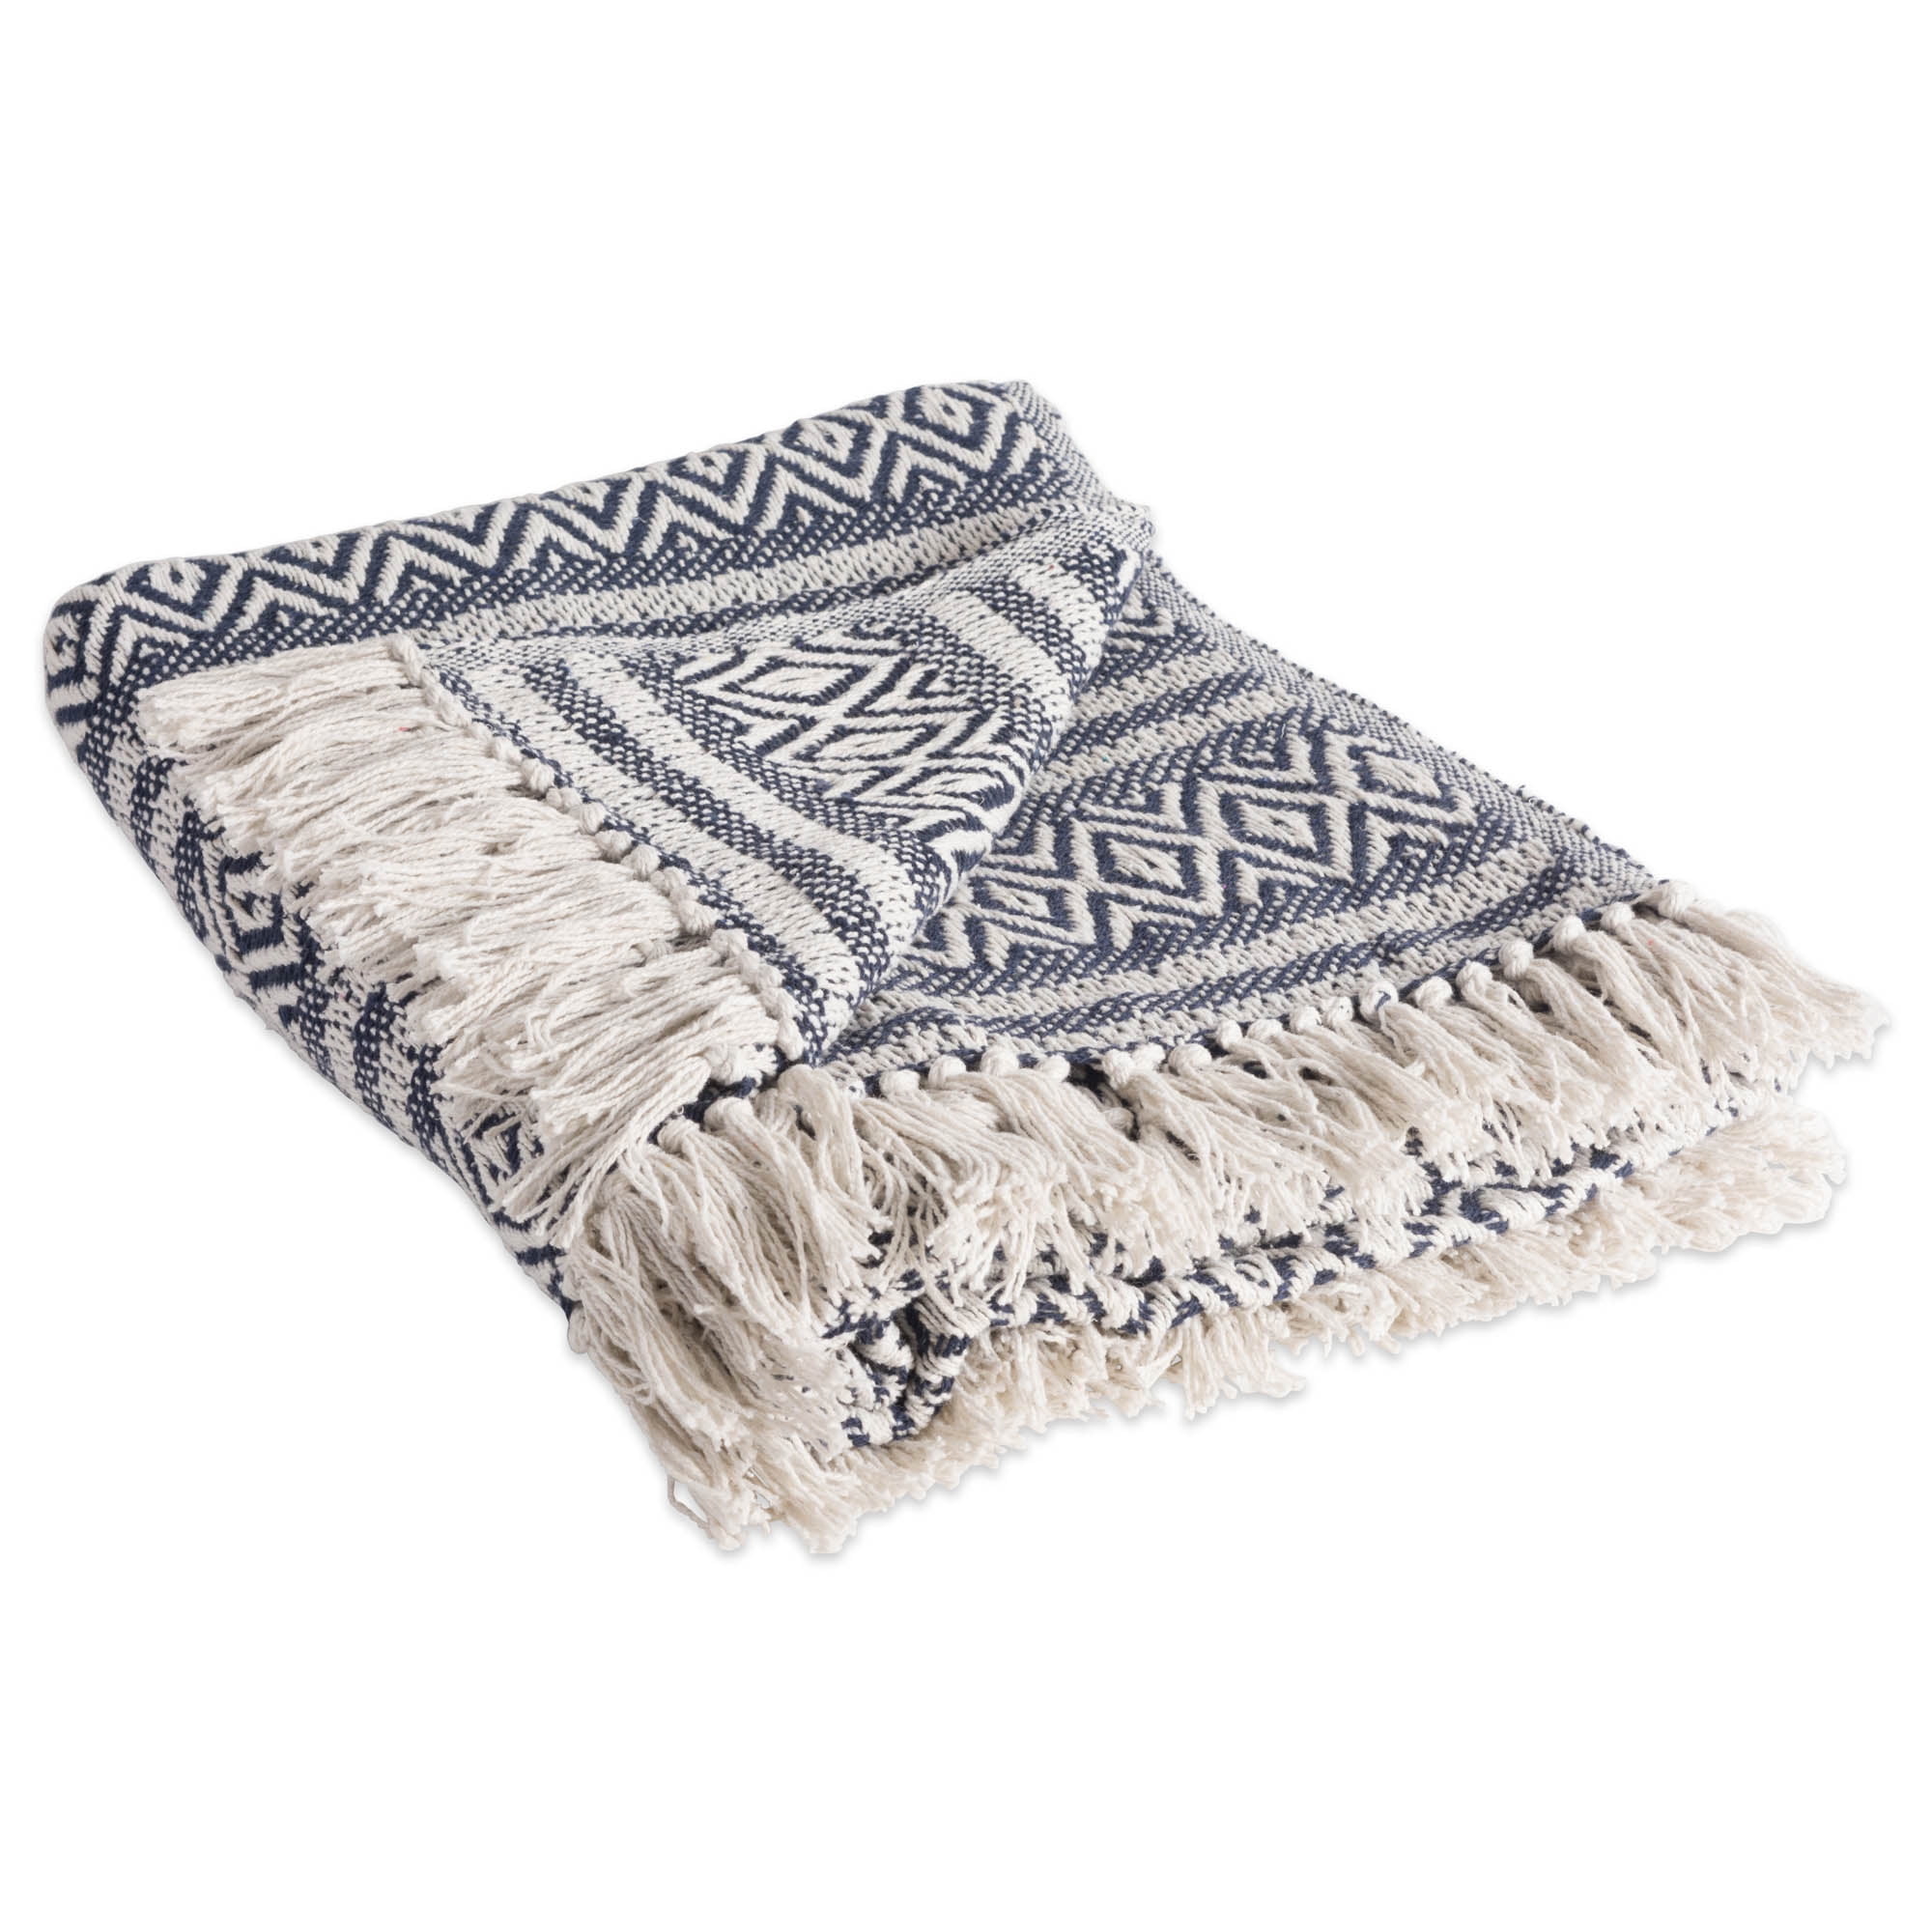 50x60 Inches CPT5060B Americanflat Nira Black and Cream Chevron Cotton Blanket Throw with Fringe